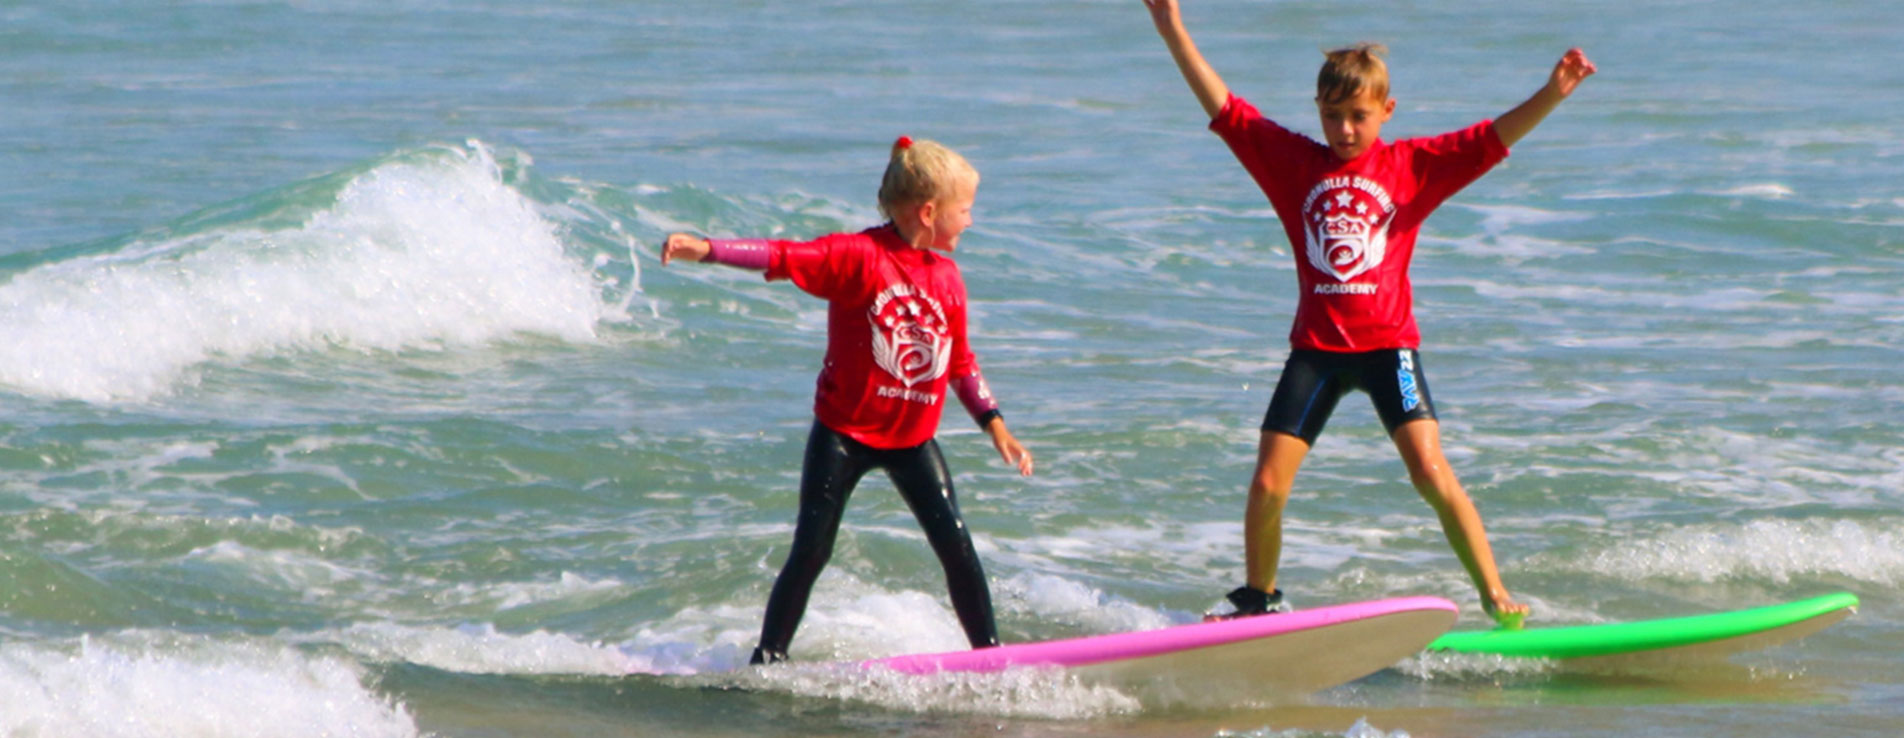 Cronulla Surfing Academy kids sessions